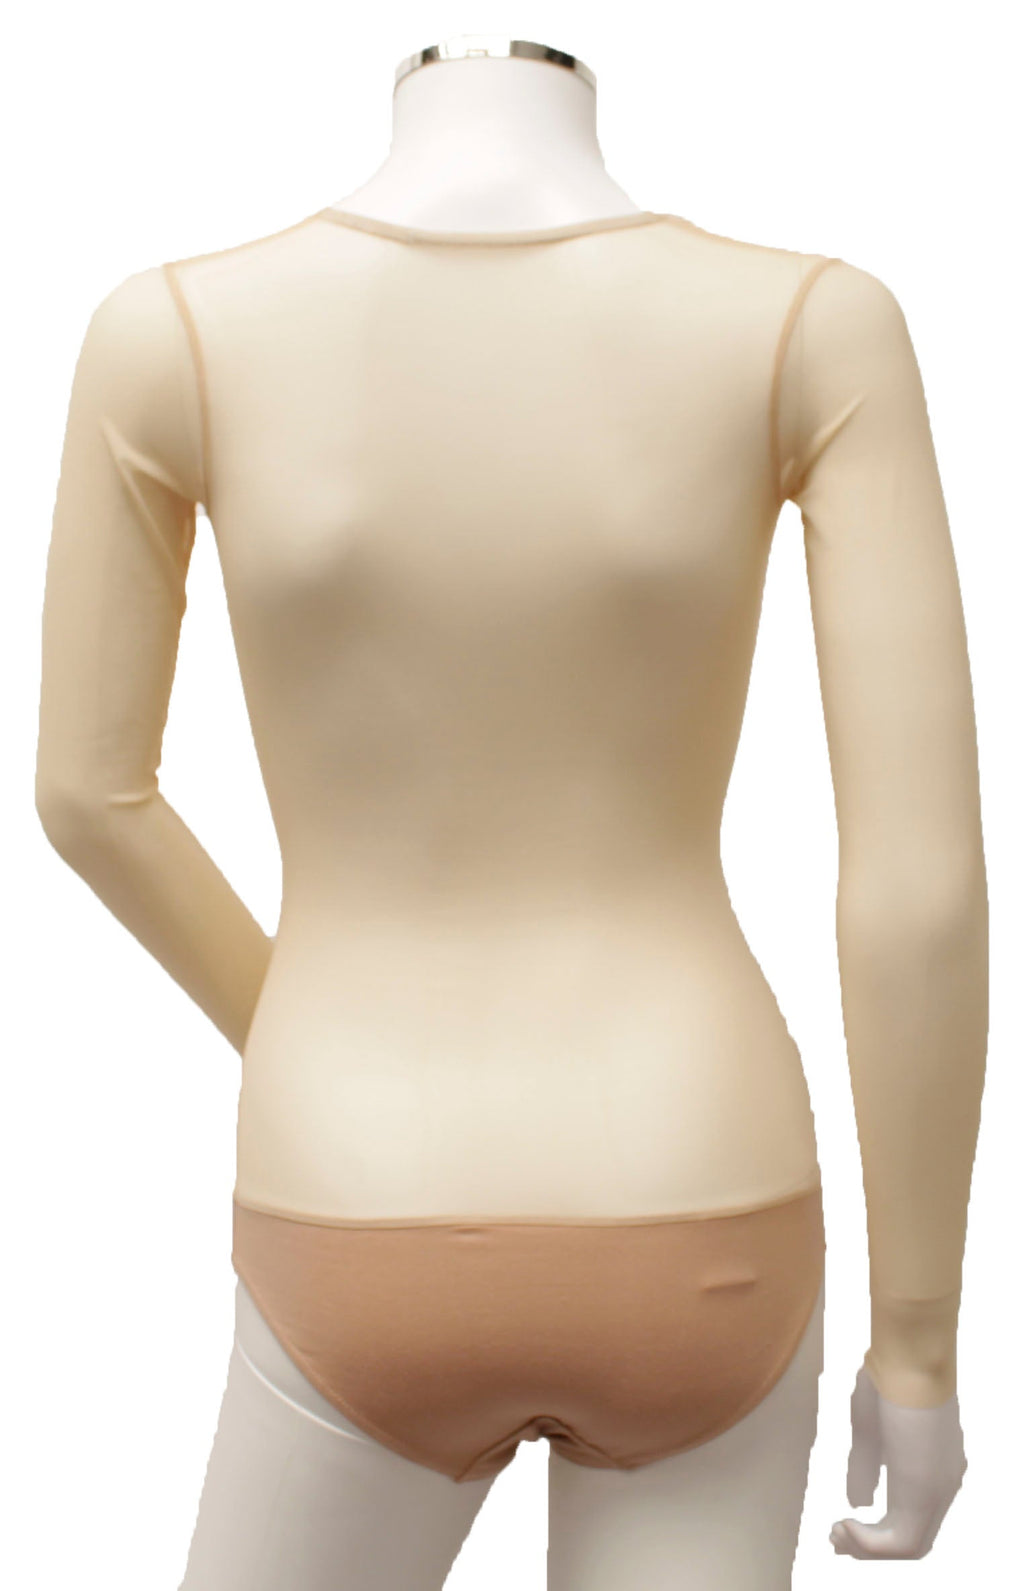 IN STOCK - Underbust with Sleeves - Butterscotch